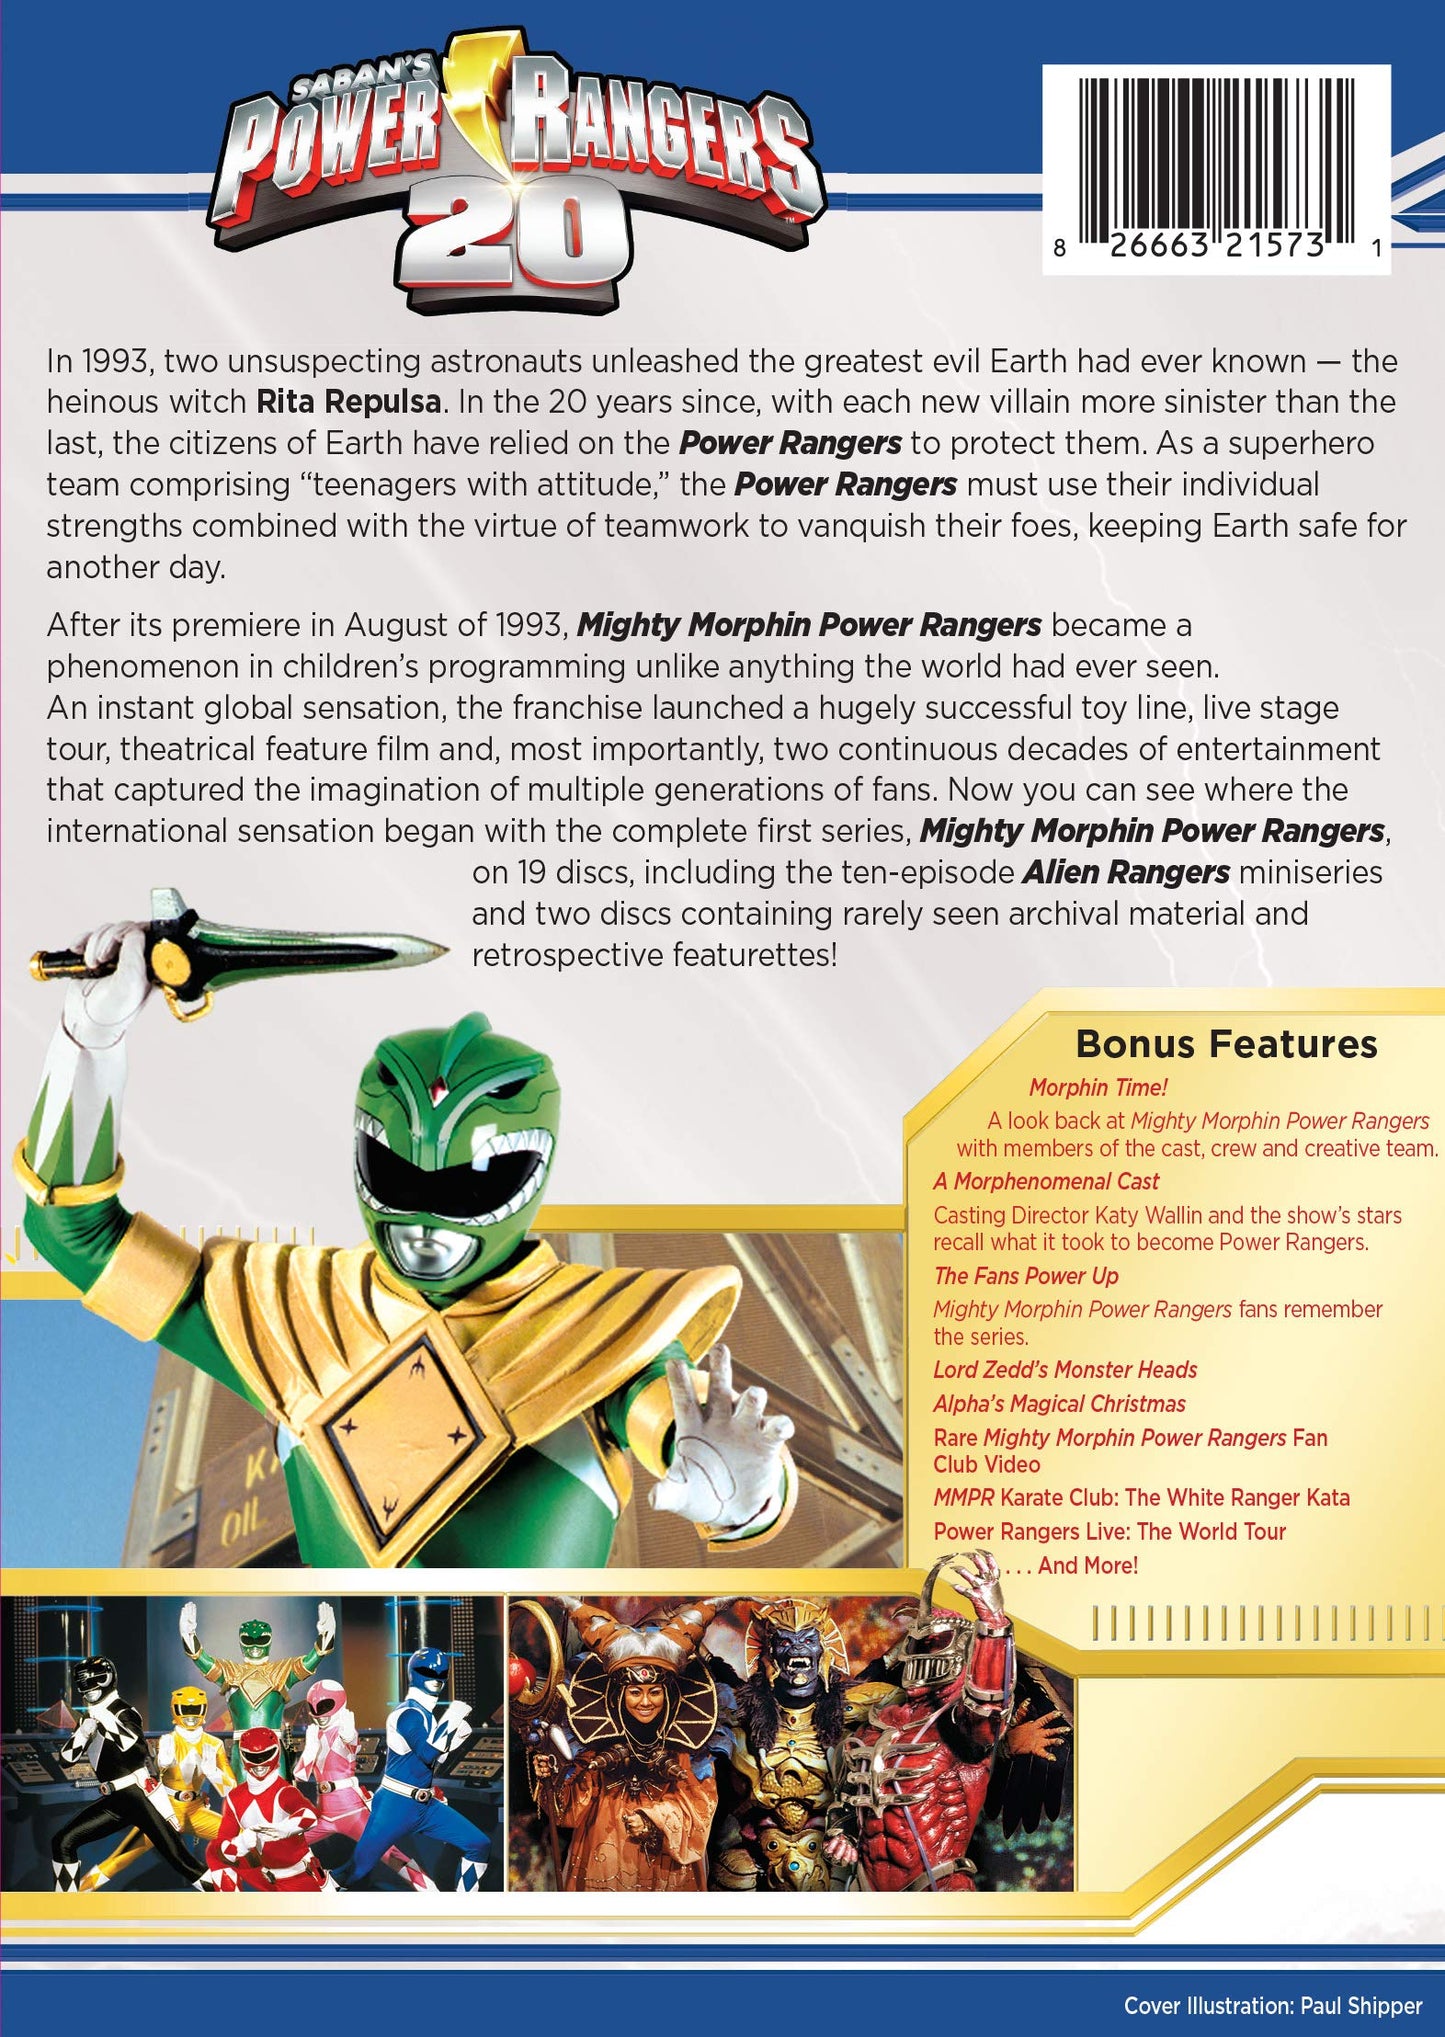 Mighty Morphin Power Rangers: The Complete Series - DVD